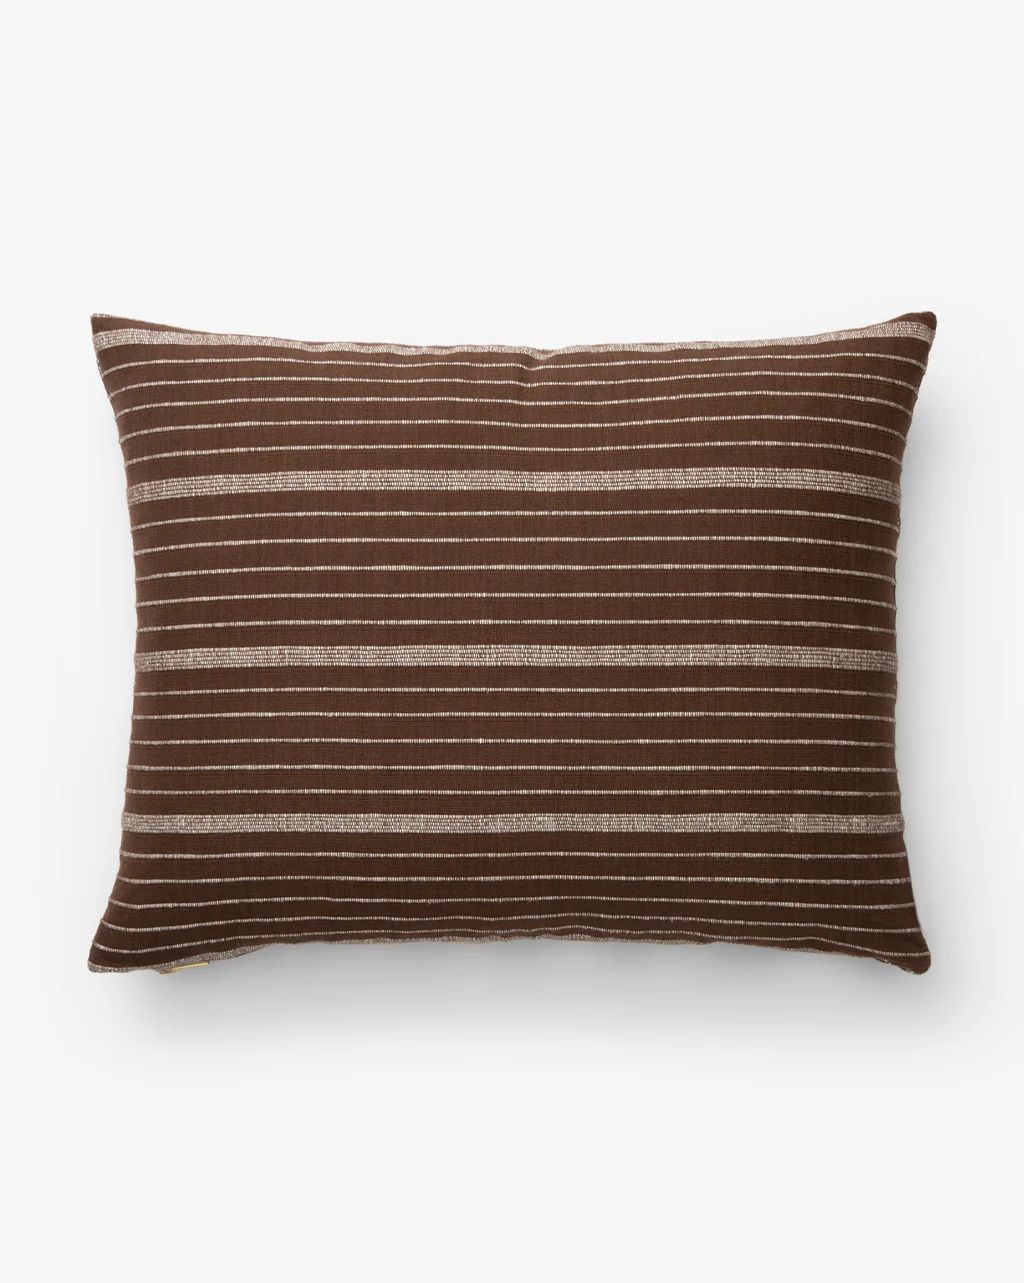 Mabyn Pillow Cover | McGee & Co.